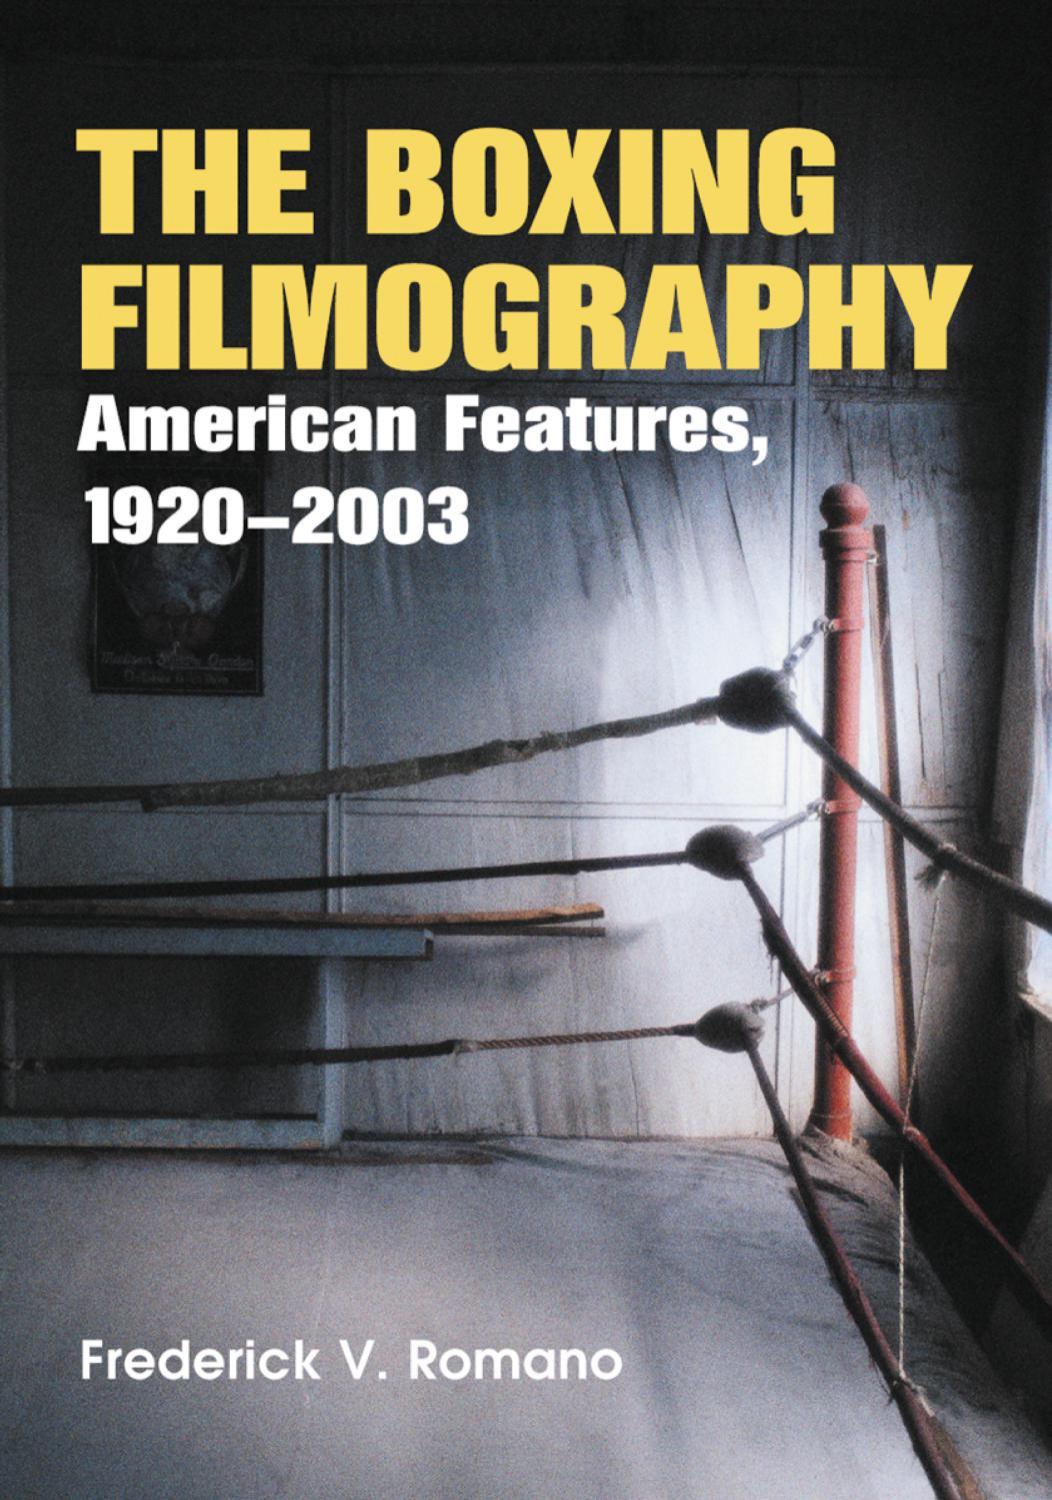 The Boxing Filmography : American Features, 1920-2003 by Frederick V. Romano